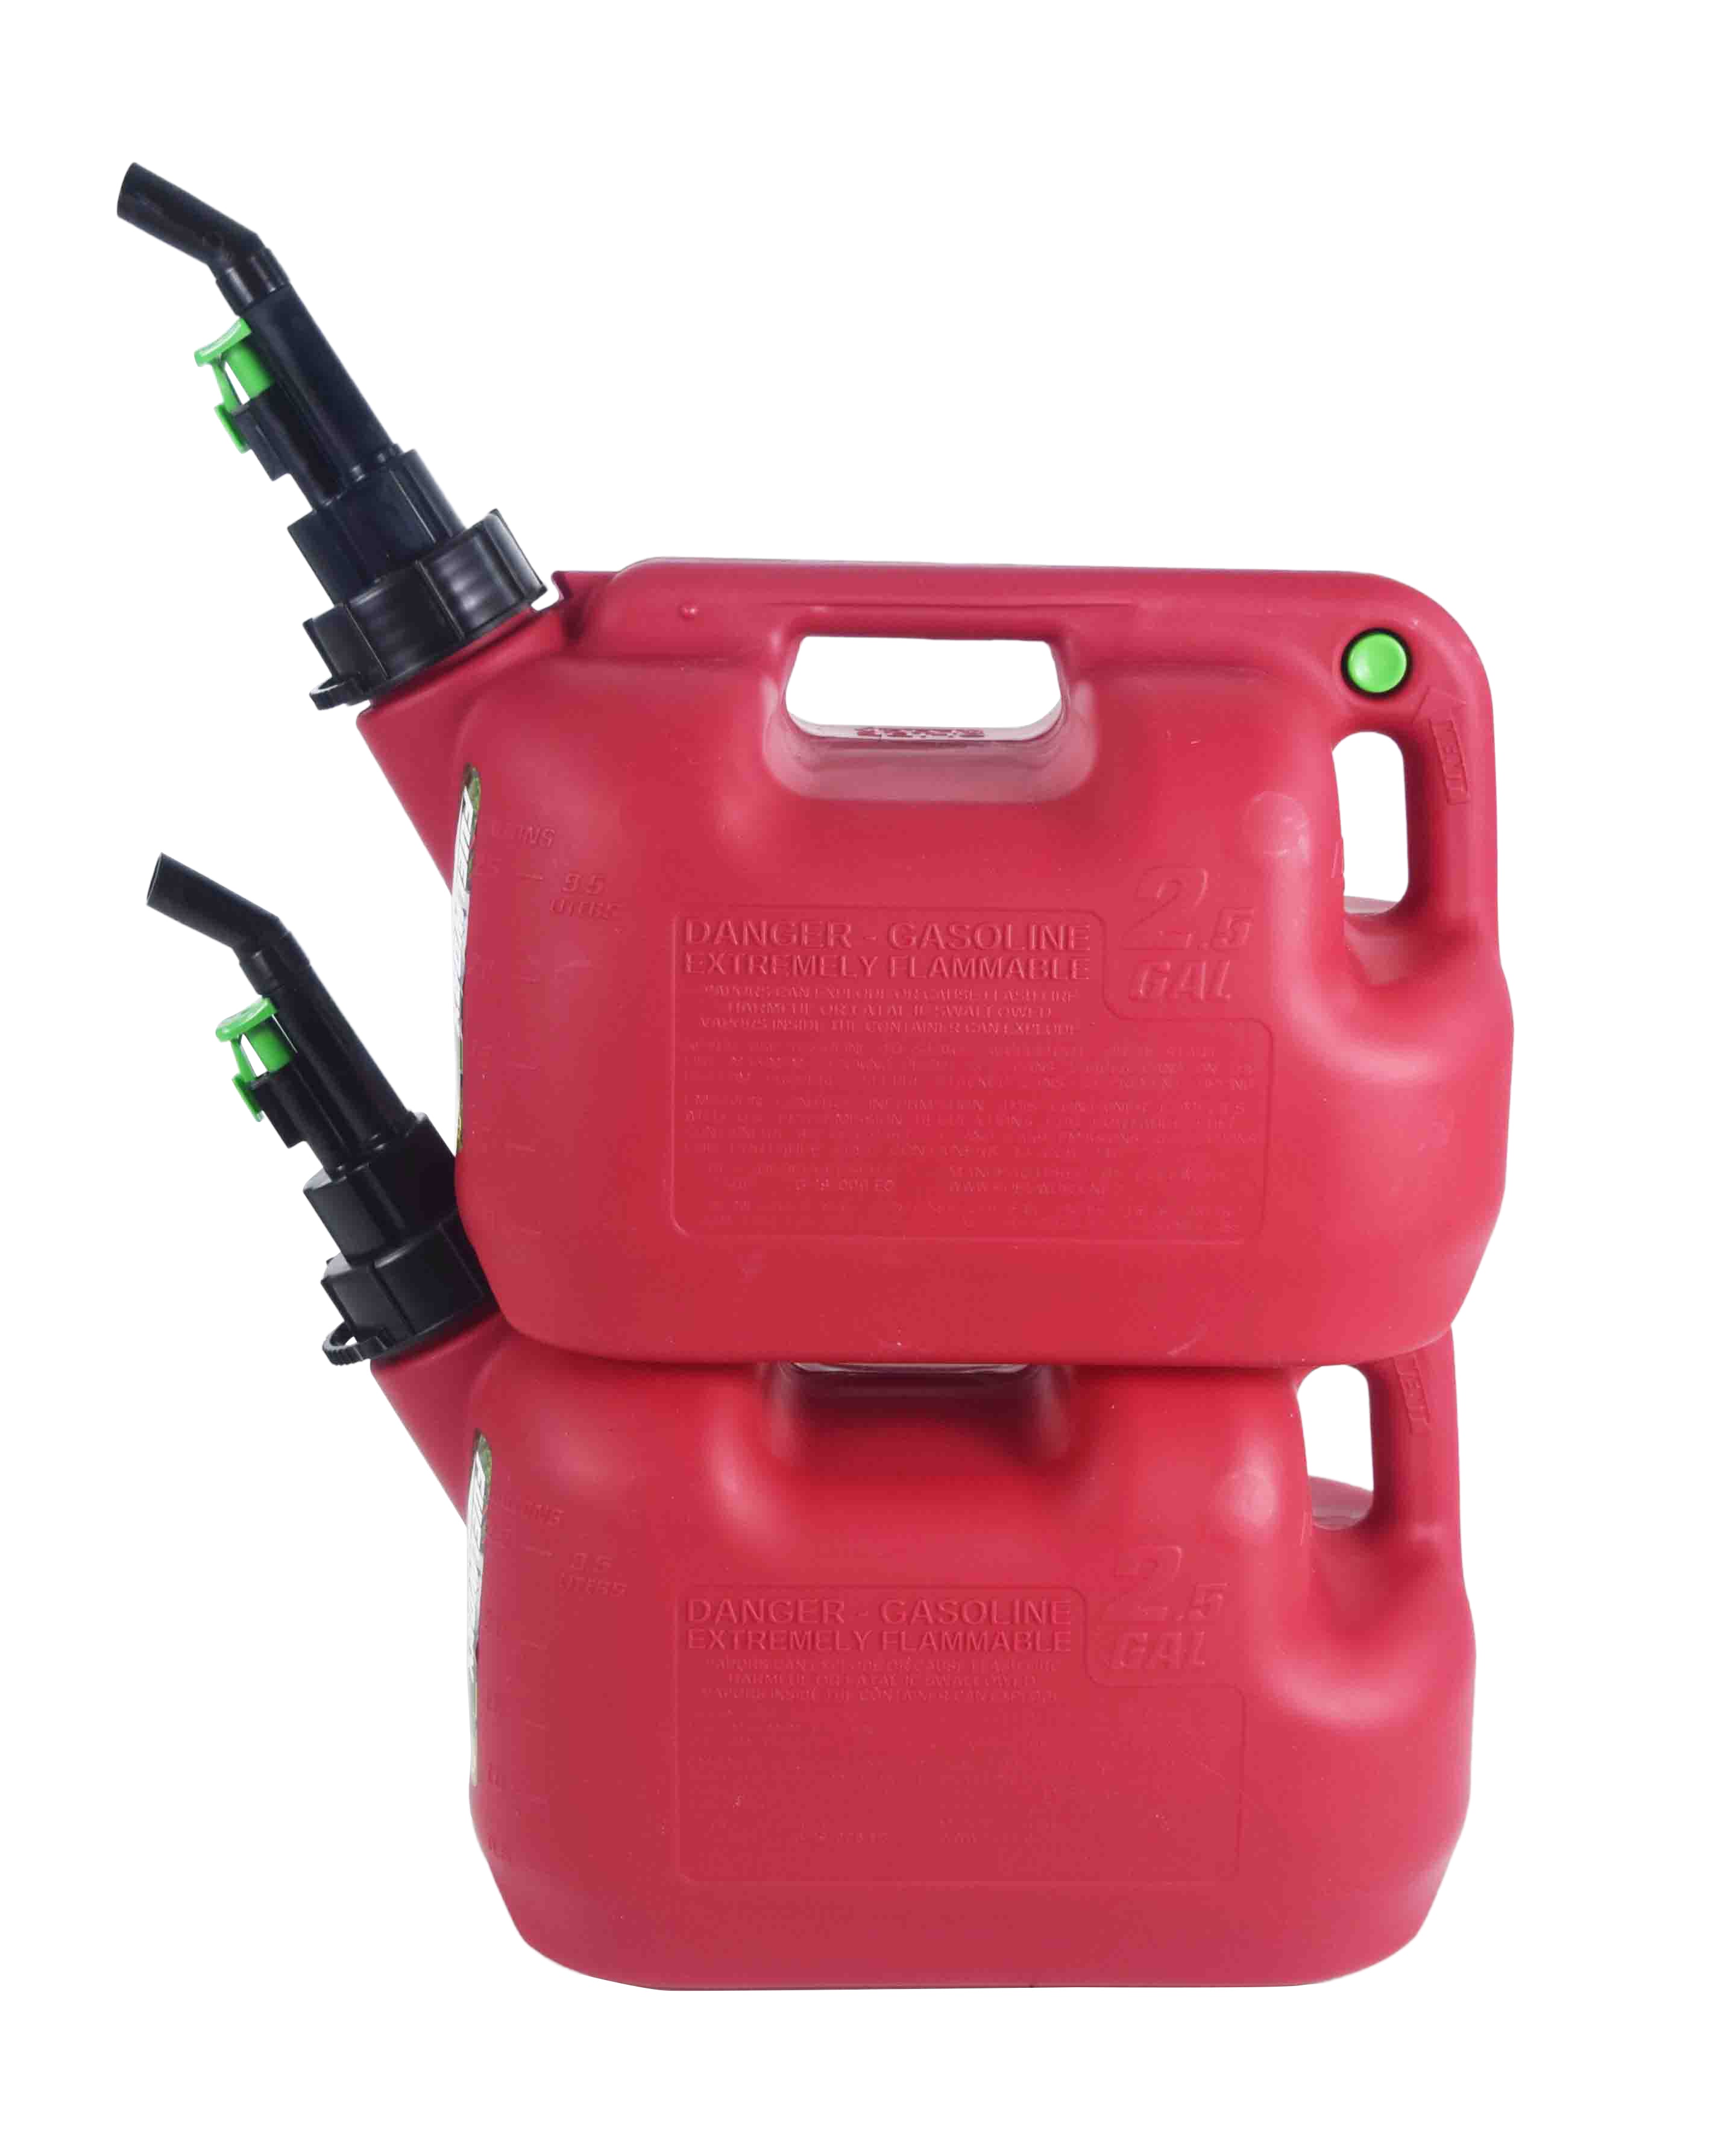 Fuelworx-Red-2.5-Gallon-Stackable-Fast-Pour-Gas-Fuel-Cans-CARB-Compliant-Made-in-The-USA-2.5-Gallon-Gas-2-Pack-image-2